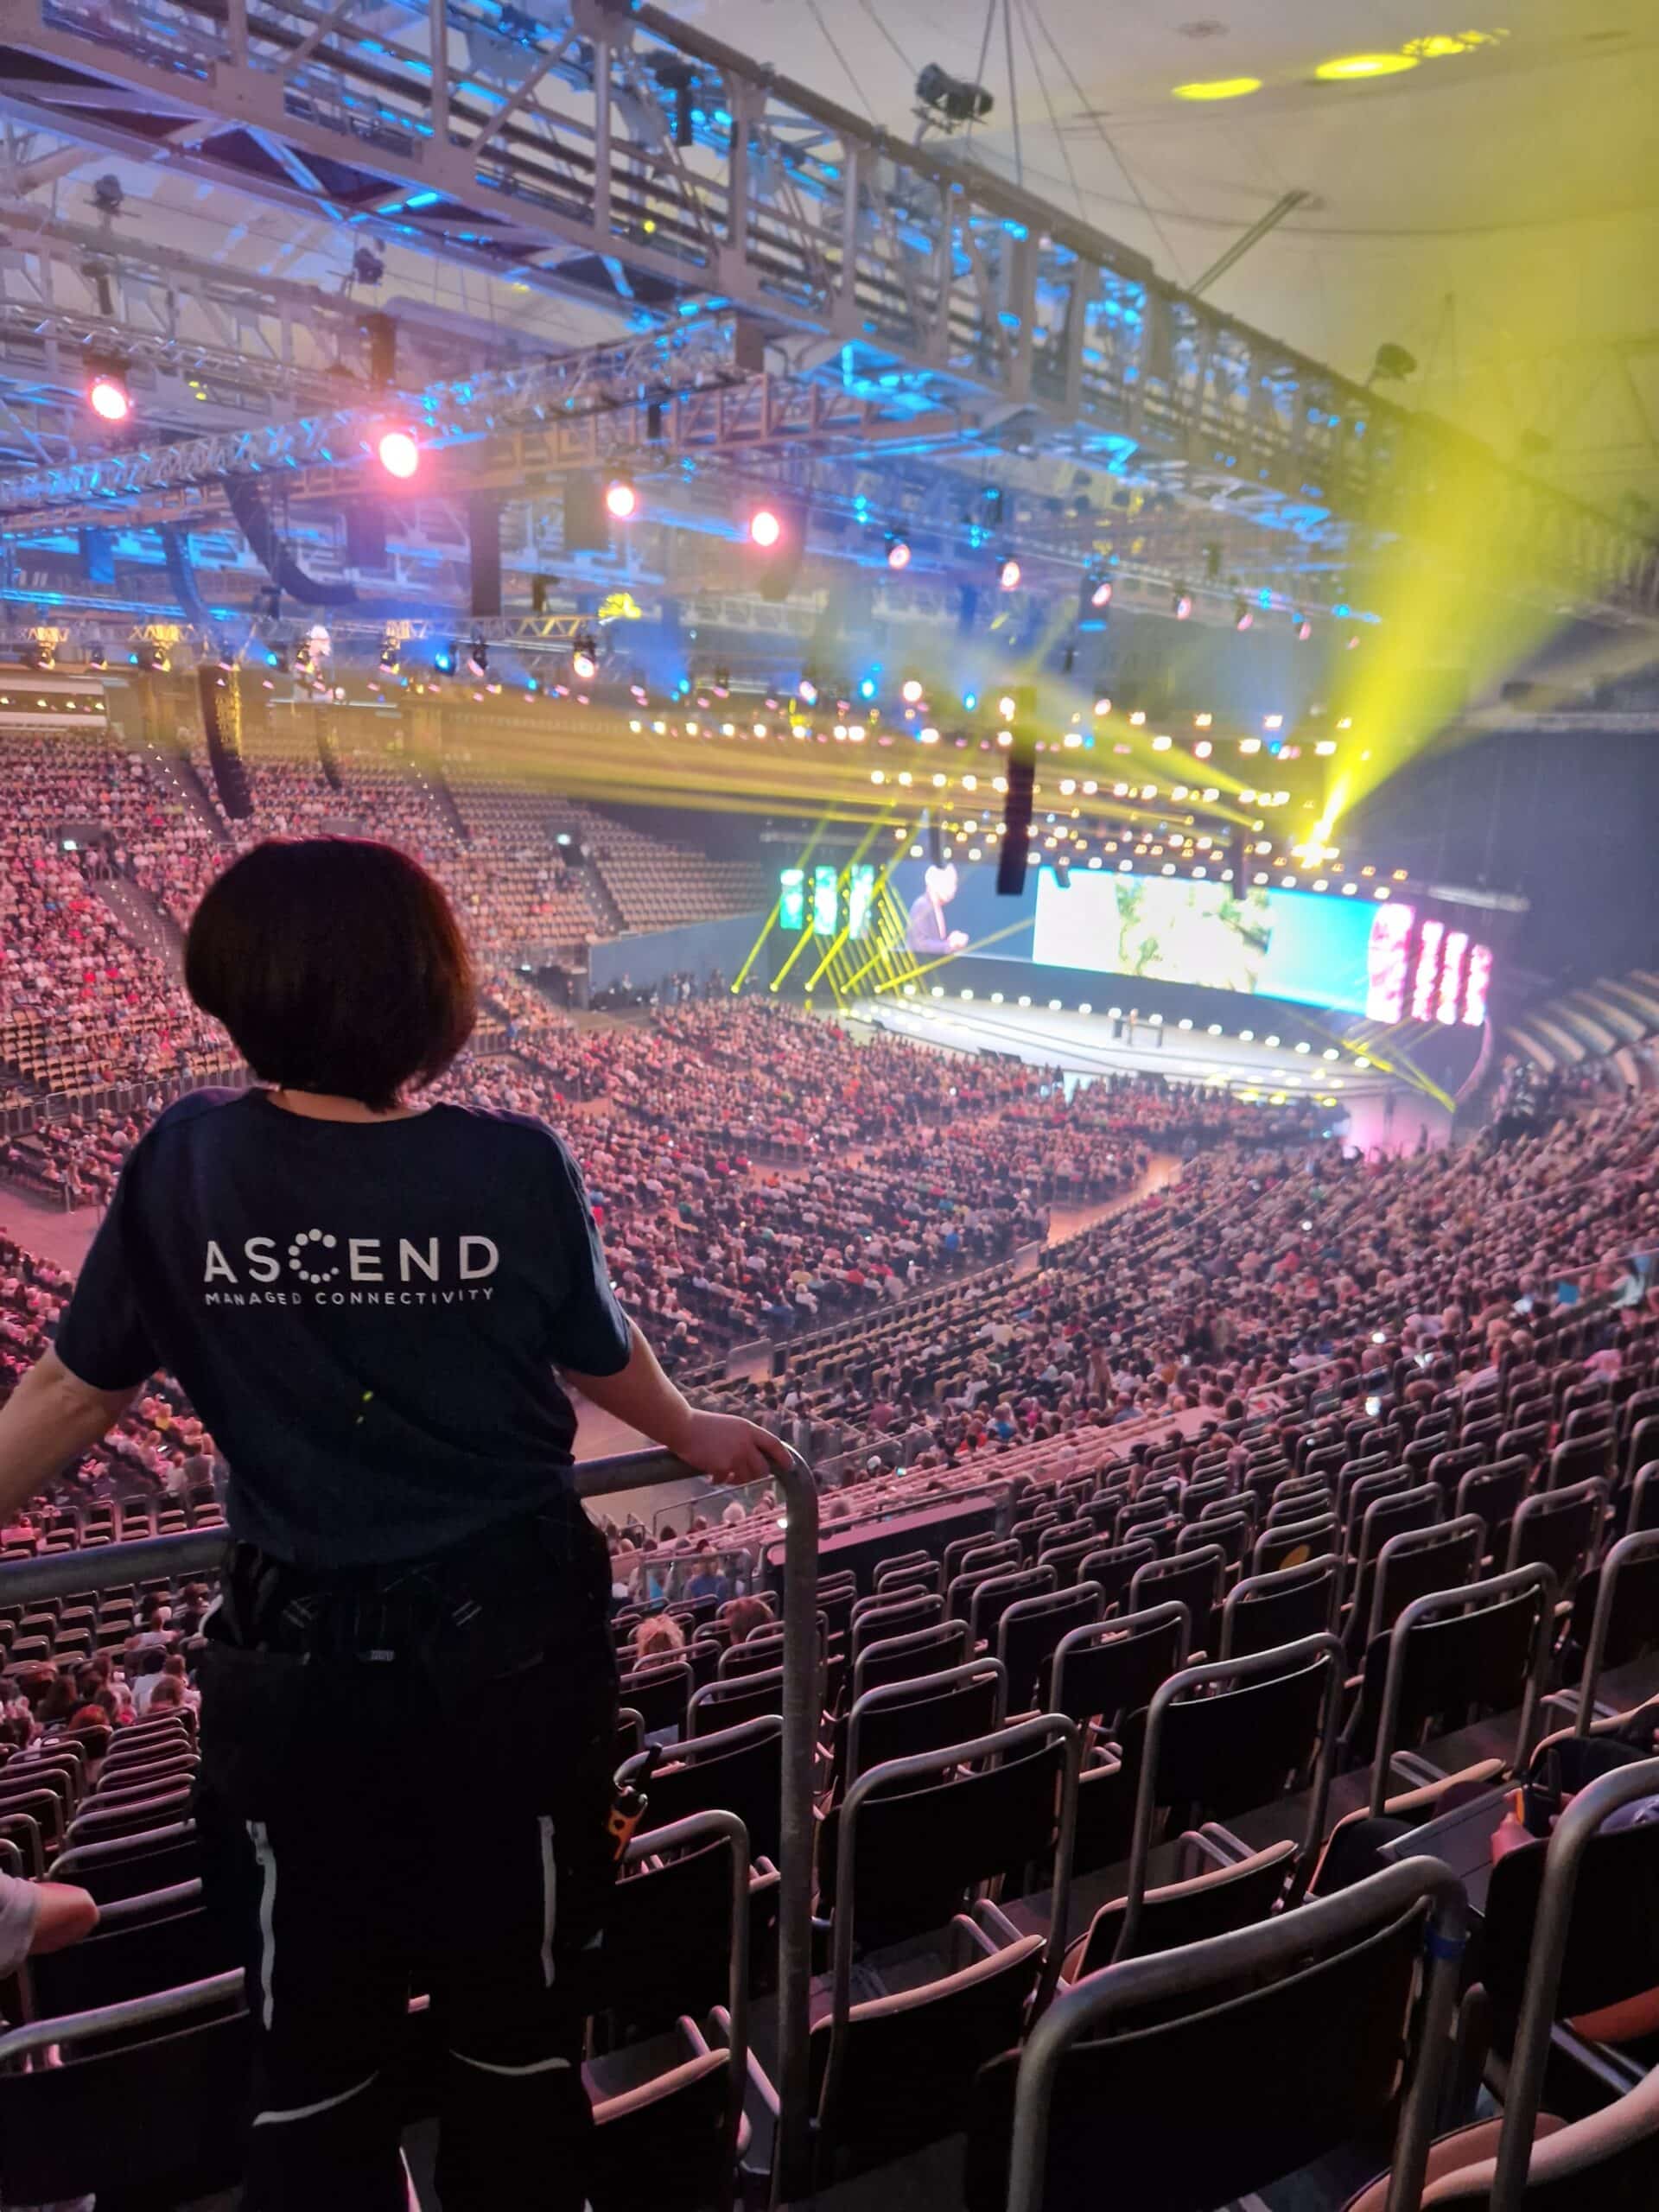 Colleague from the Ascend team stands in front of a crowd in the Olympic Hall at a major event